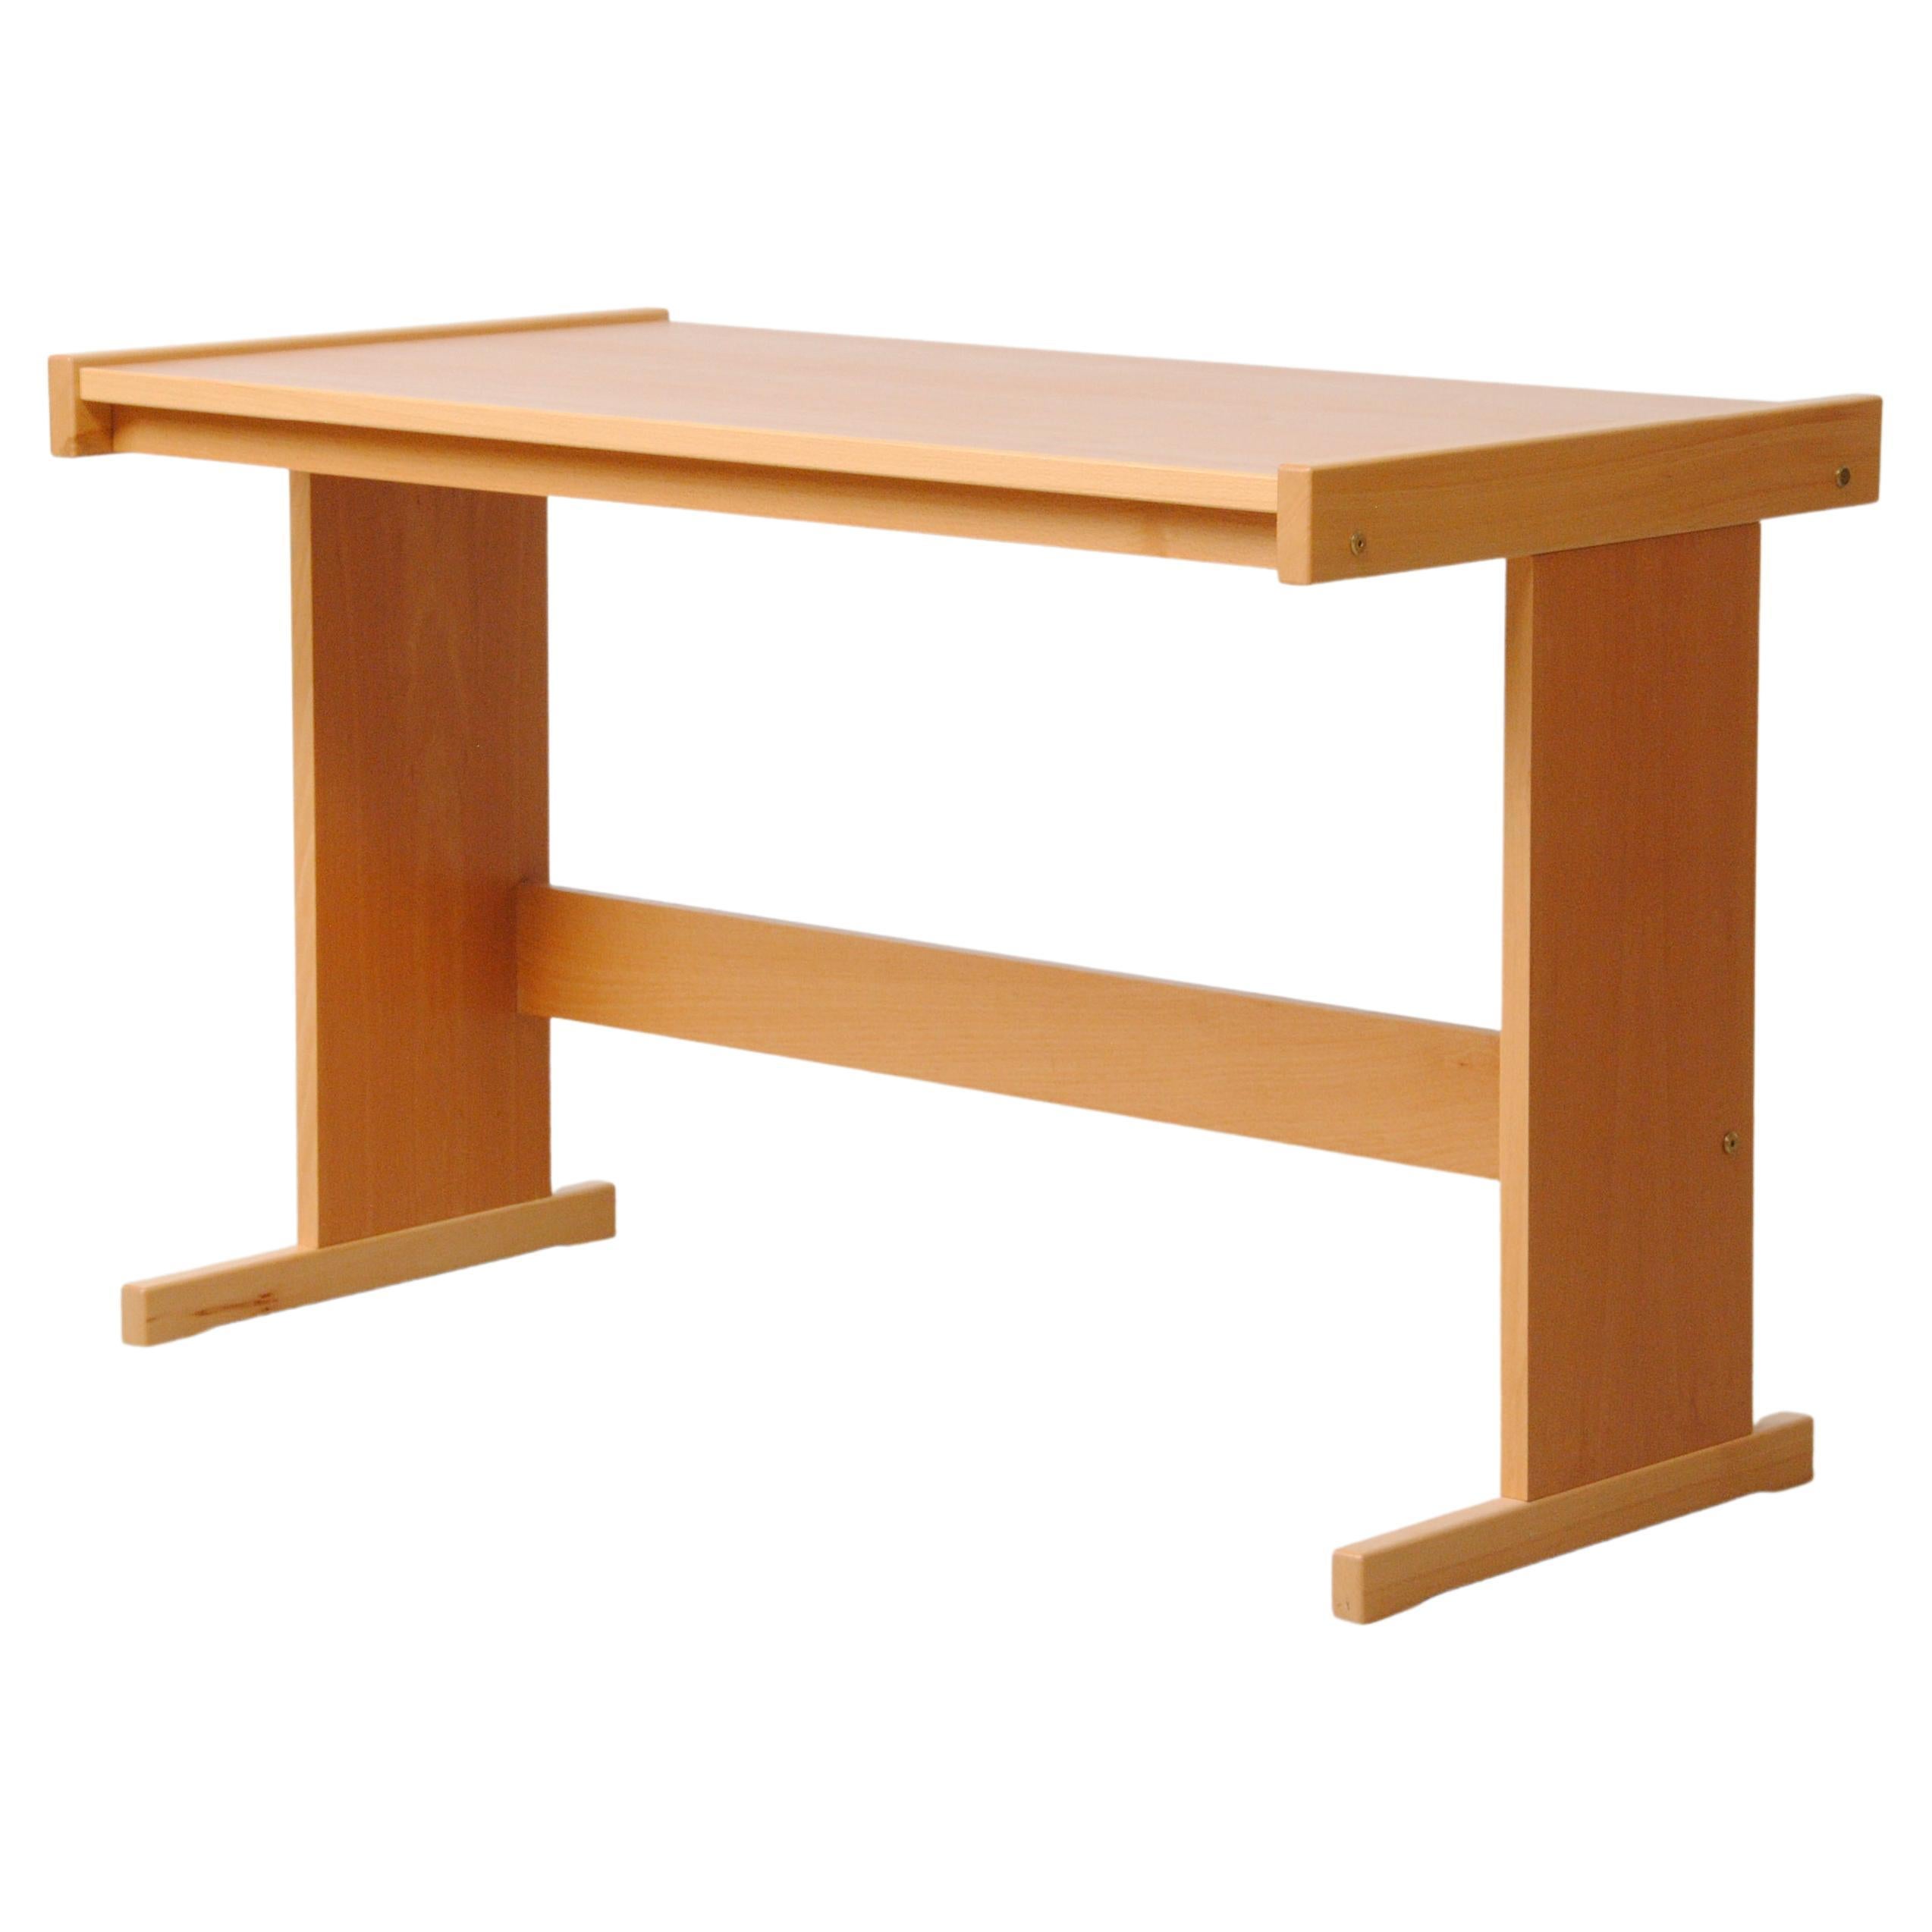 1990's Danish Bent Silberg Desk in Beech by Bent Silberg Mobler For Sale